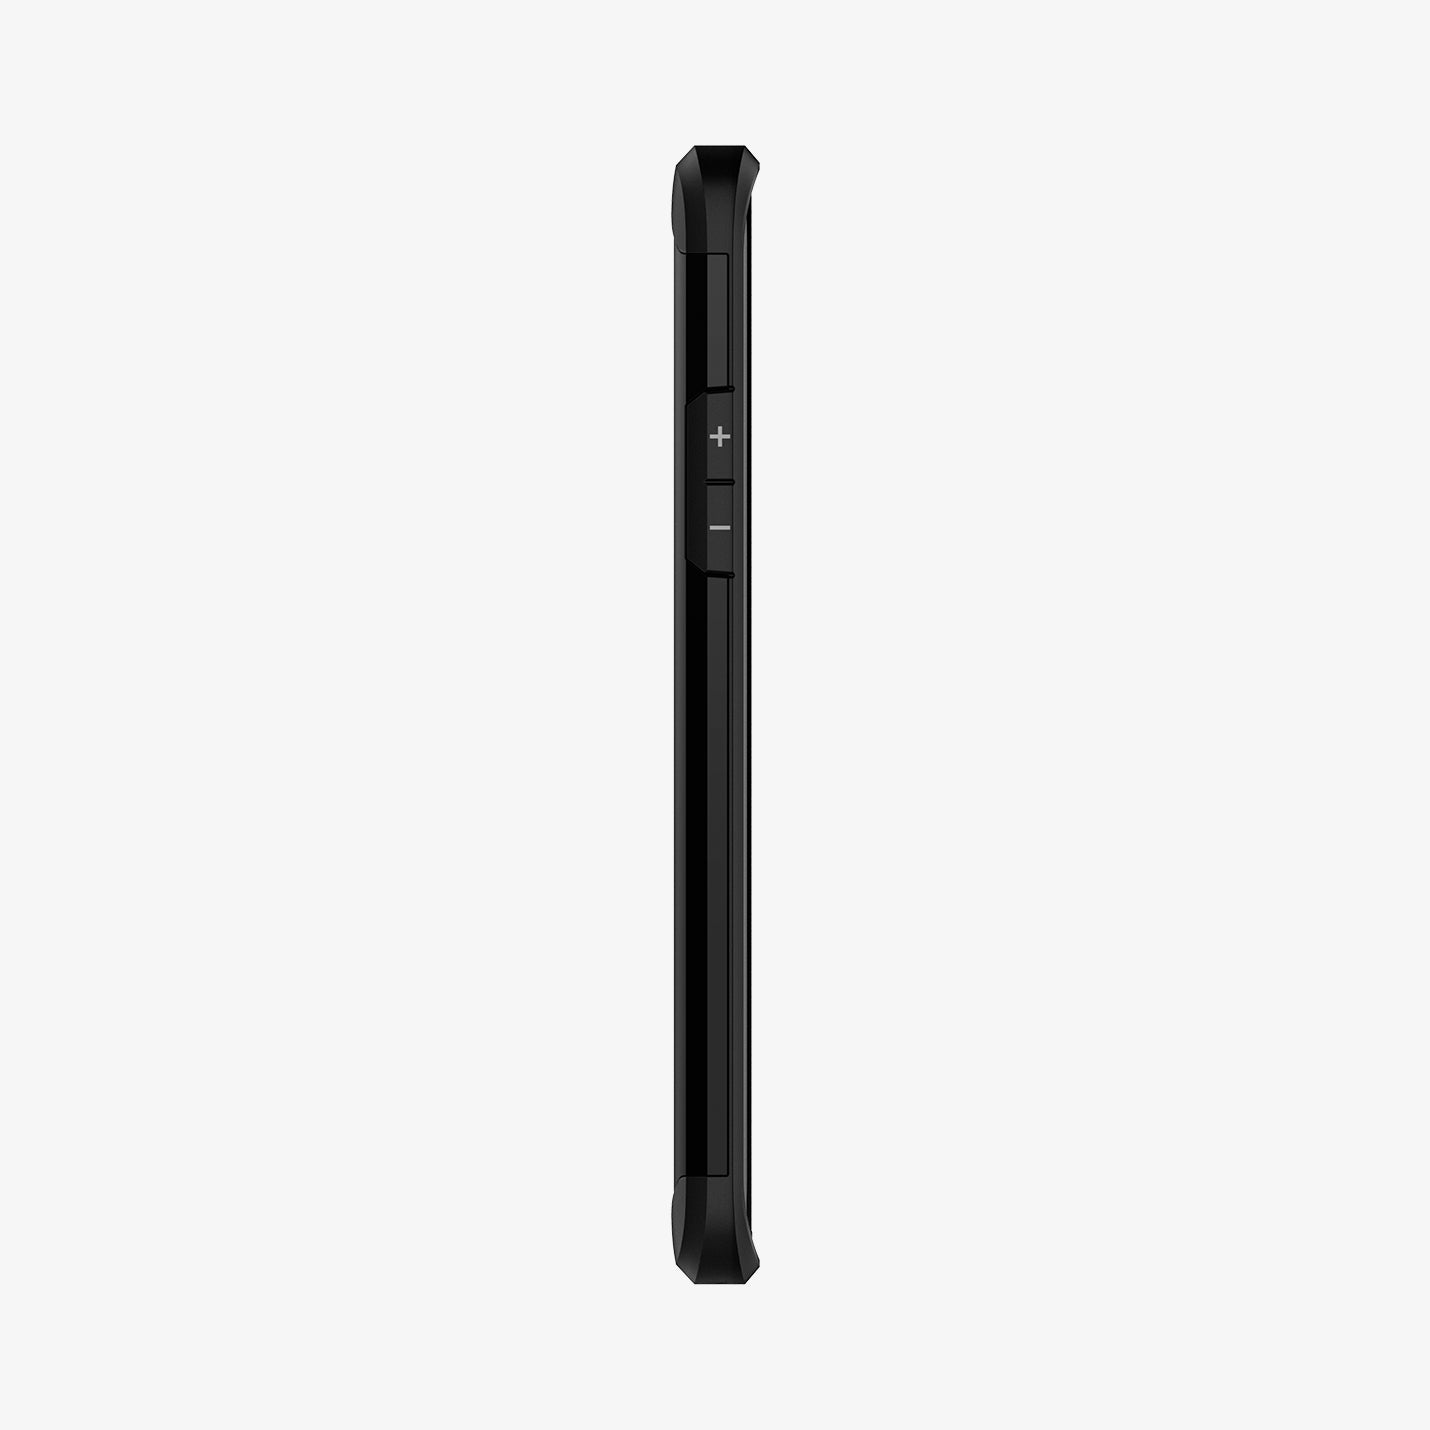 K09CS26485 - OnePlus 7 Pro Tough Armor Case in Black showing the side